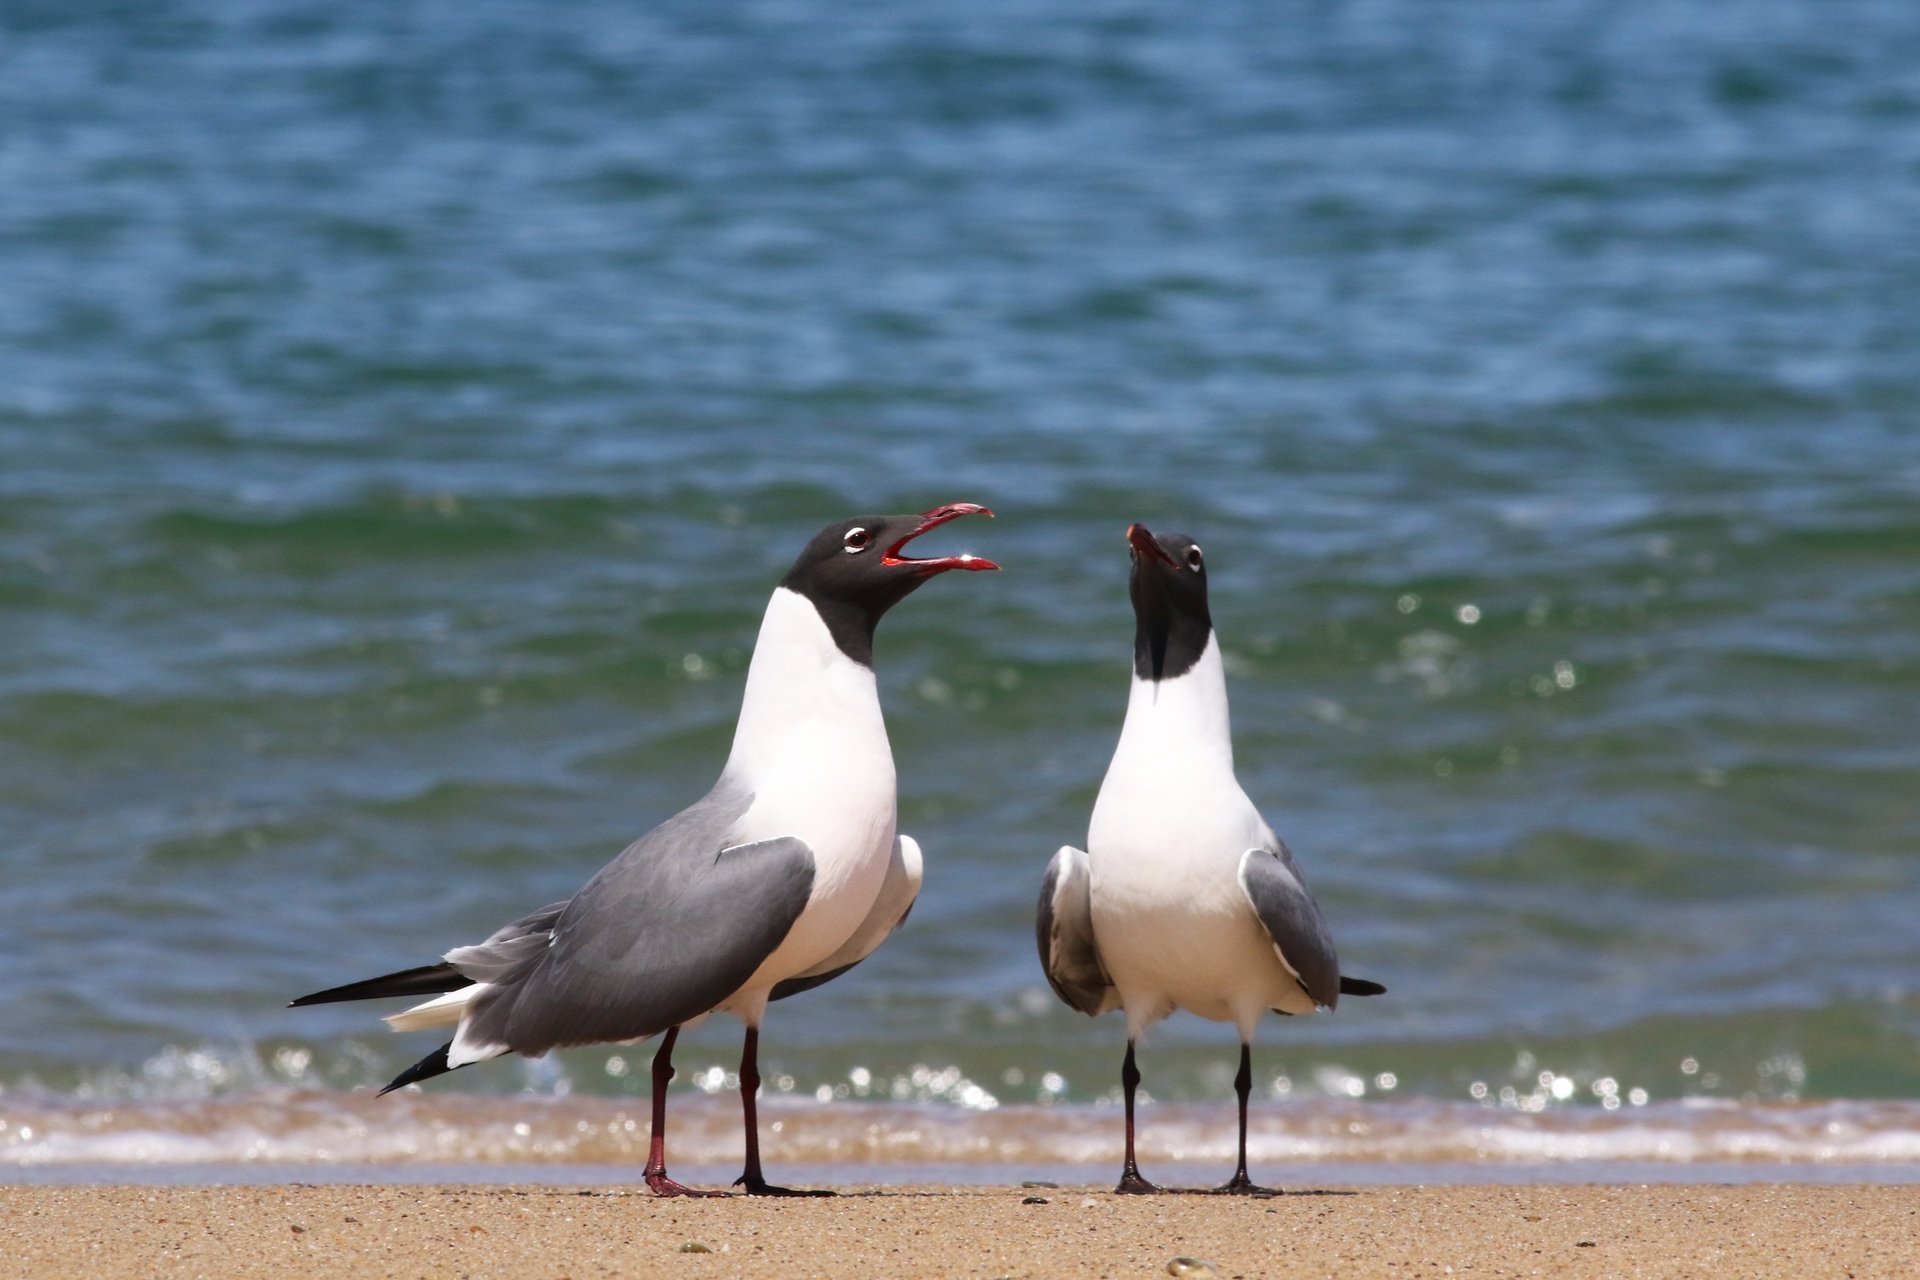 Laughing gulls by the water